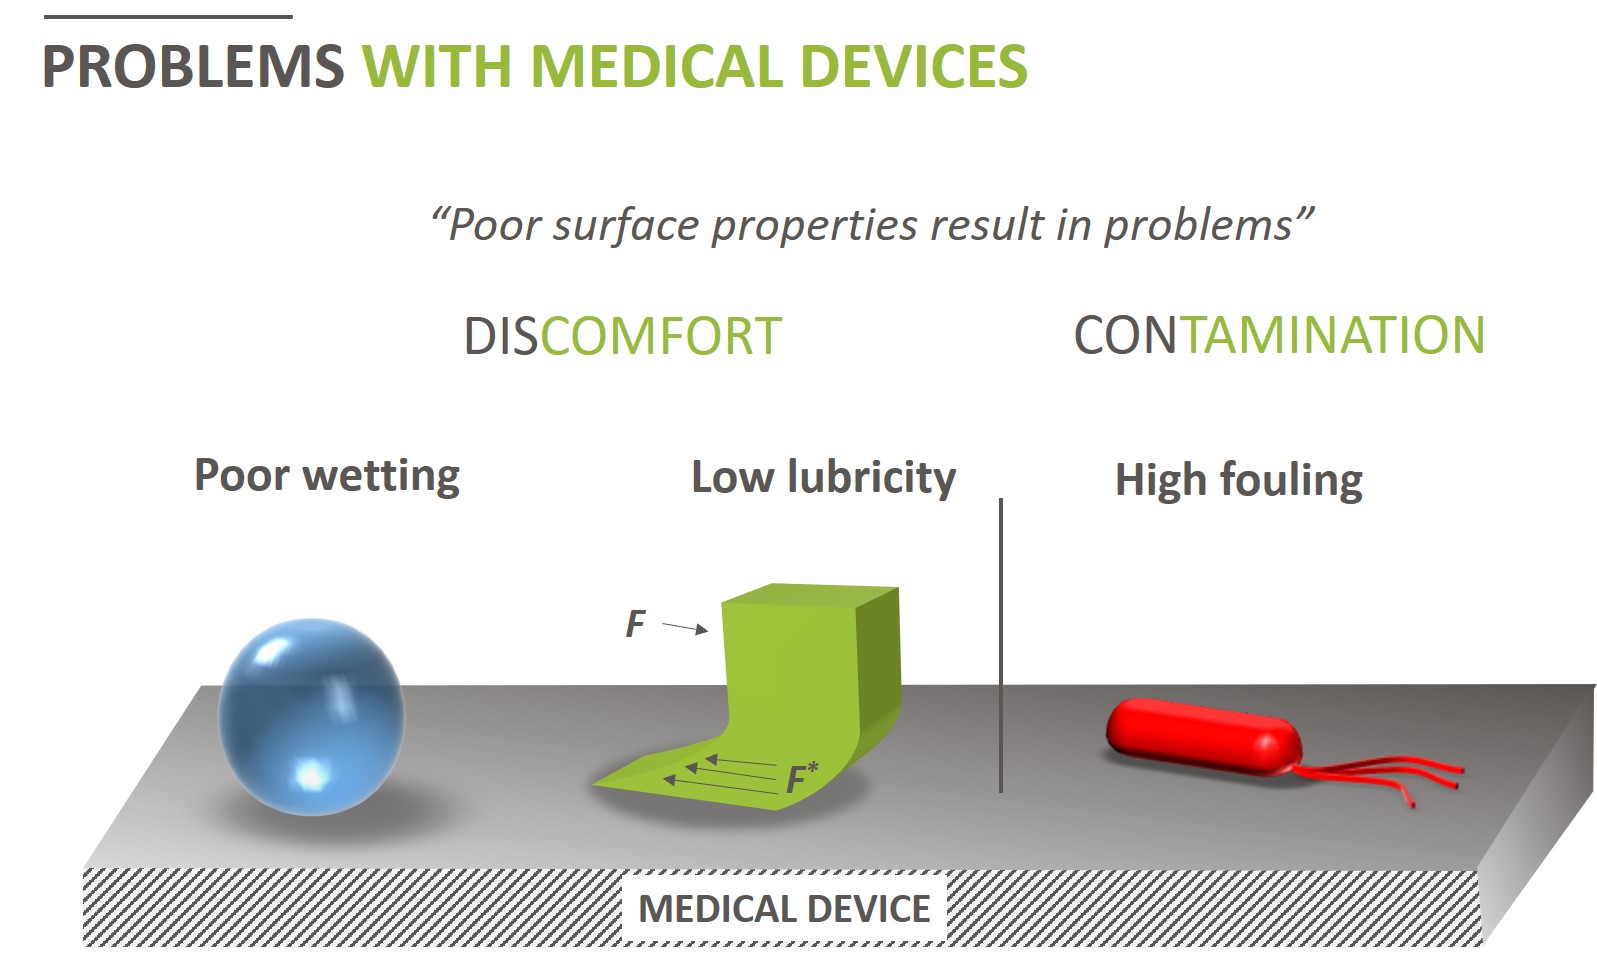 Problems with medical devices